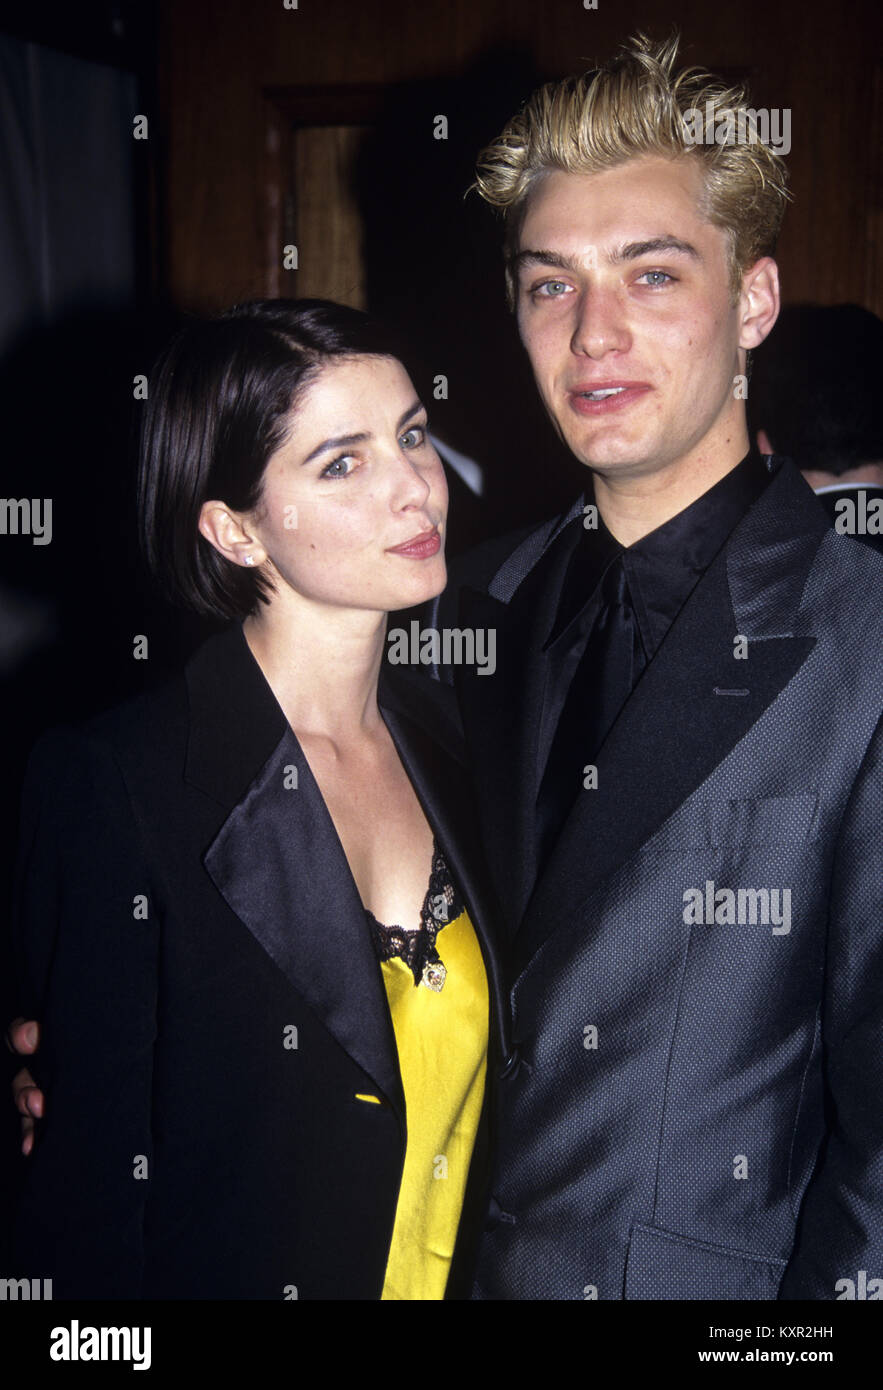 Jude Law and Sadie Frost photographed at the opening night of "Indiscretions" at the Barrymore Theater, after party at Tavern on the Green, NYC April 27, 1995. © RTMcbride / MediaPunch Stock Photo